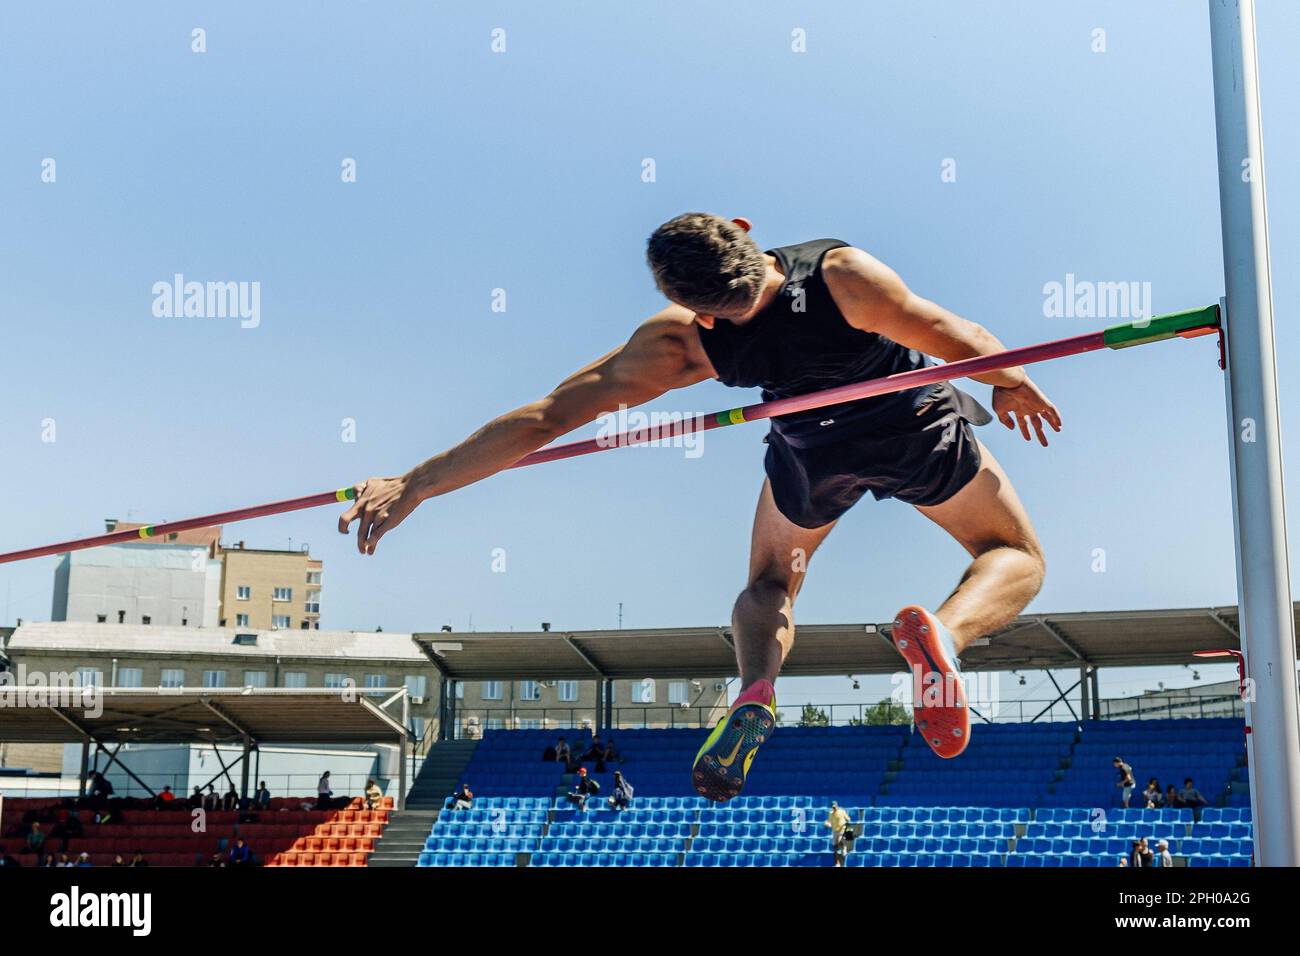 male athlete high jump athletics competition, Nike jump spikes, sports editorial photo Stock Photo